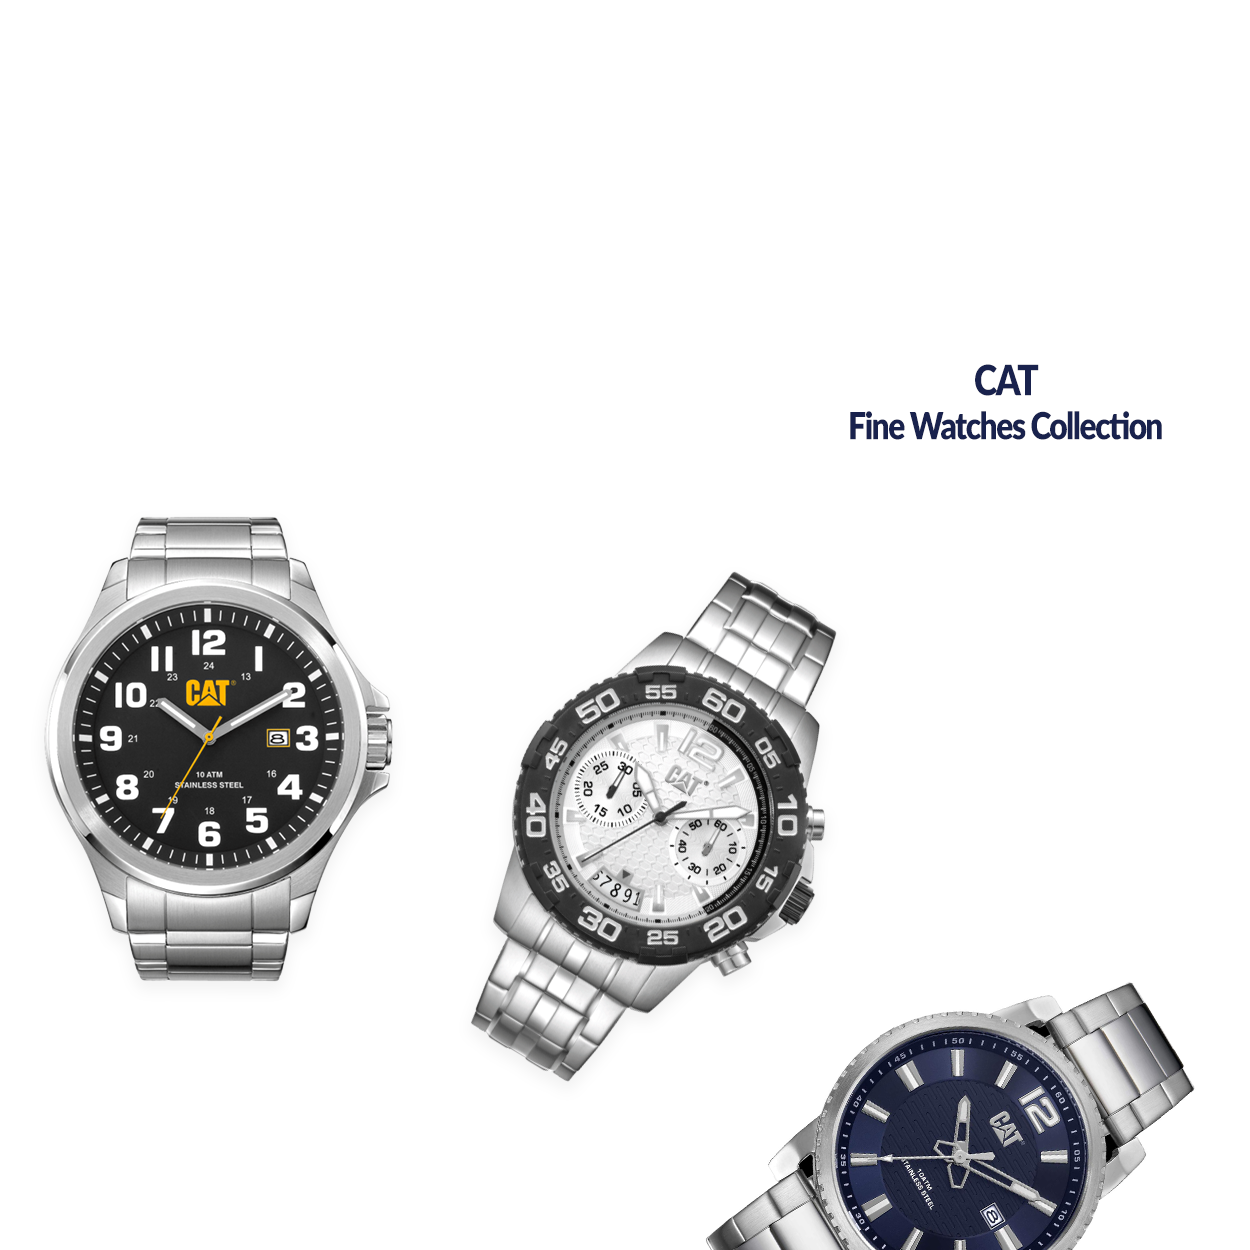 CAT fine watches collection